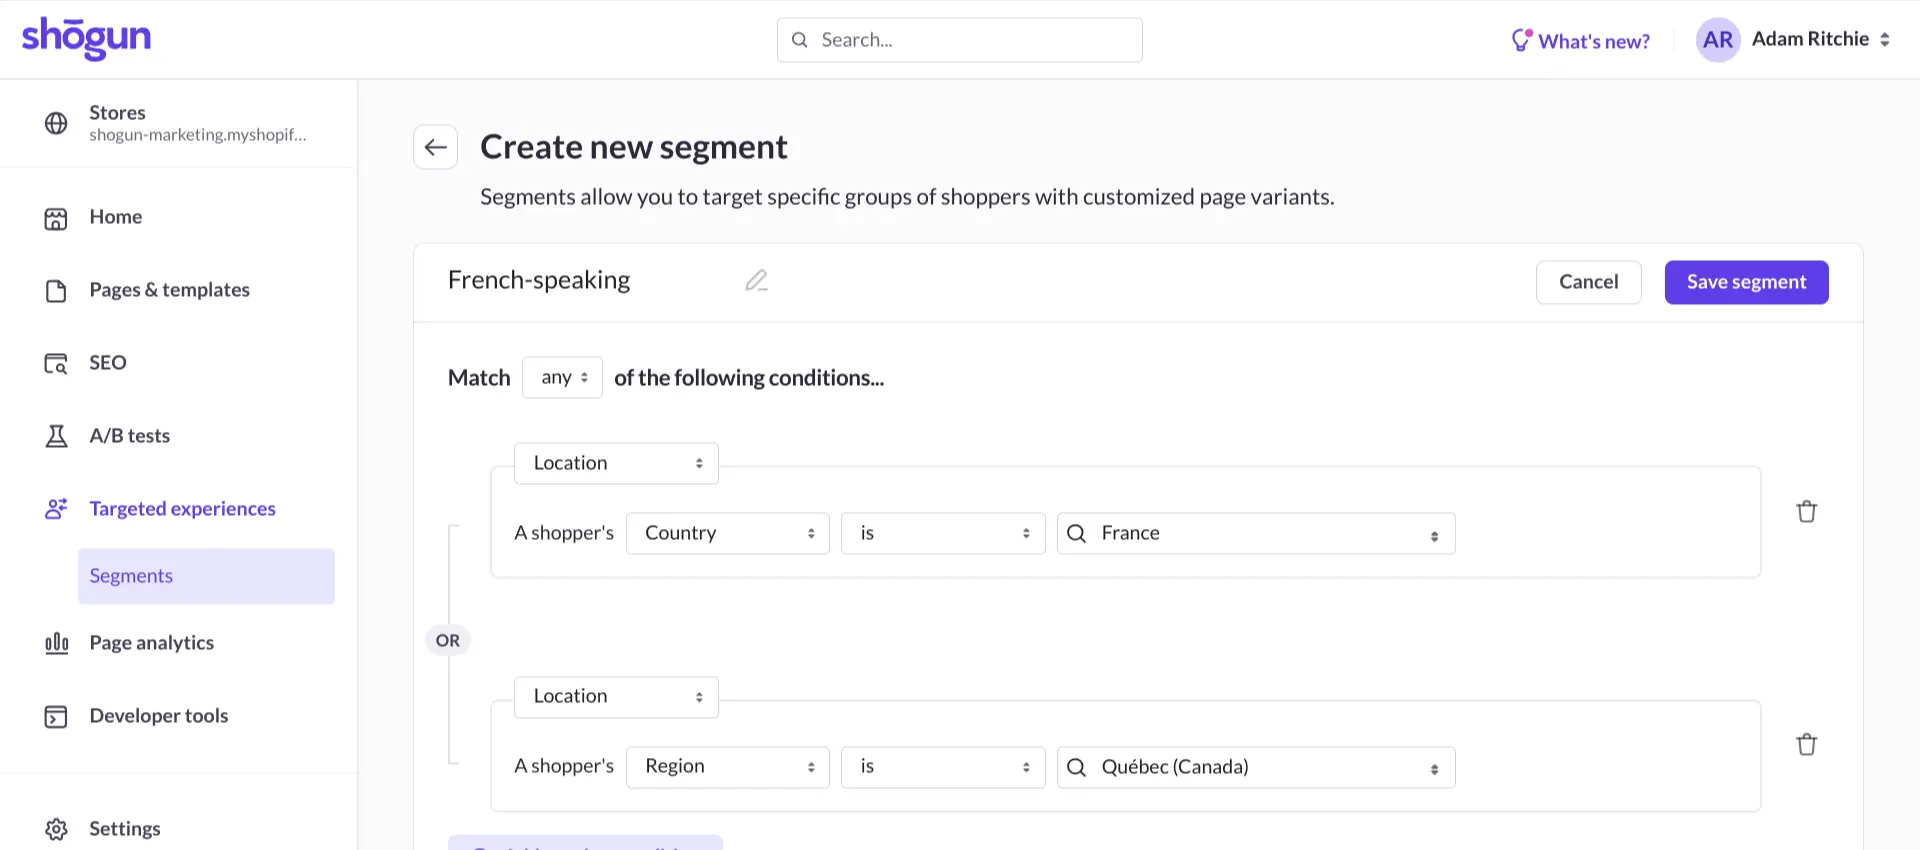 You can create a segment with a mix of countries and regions.